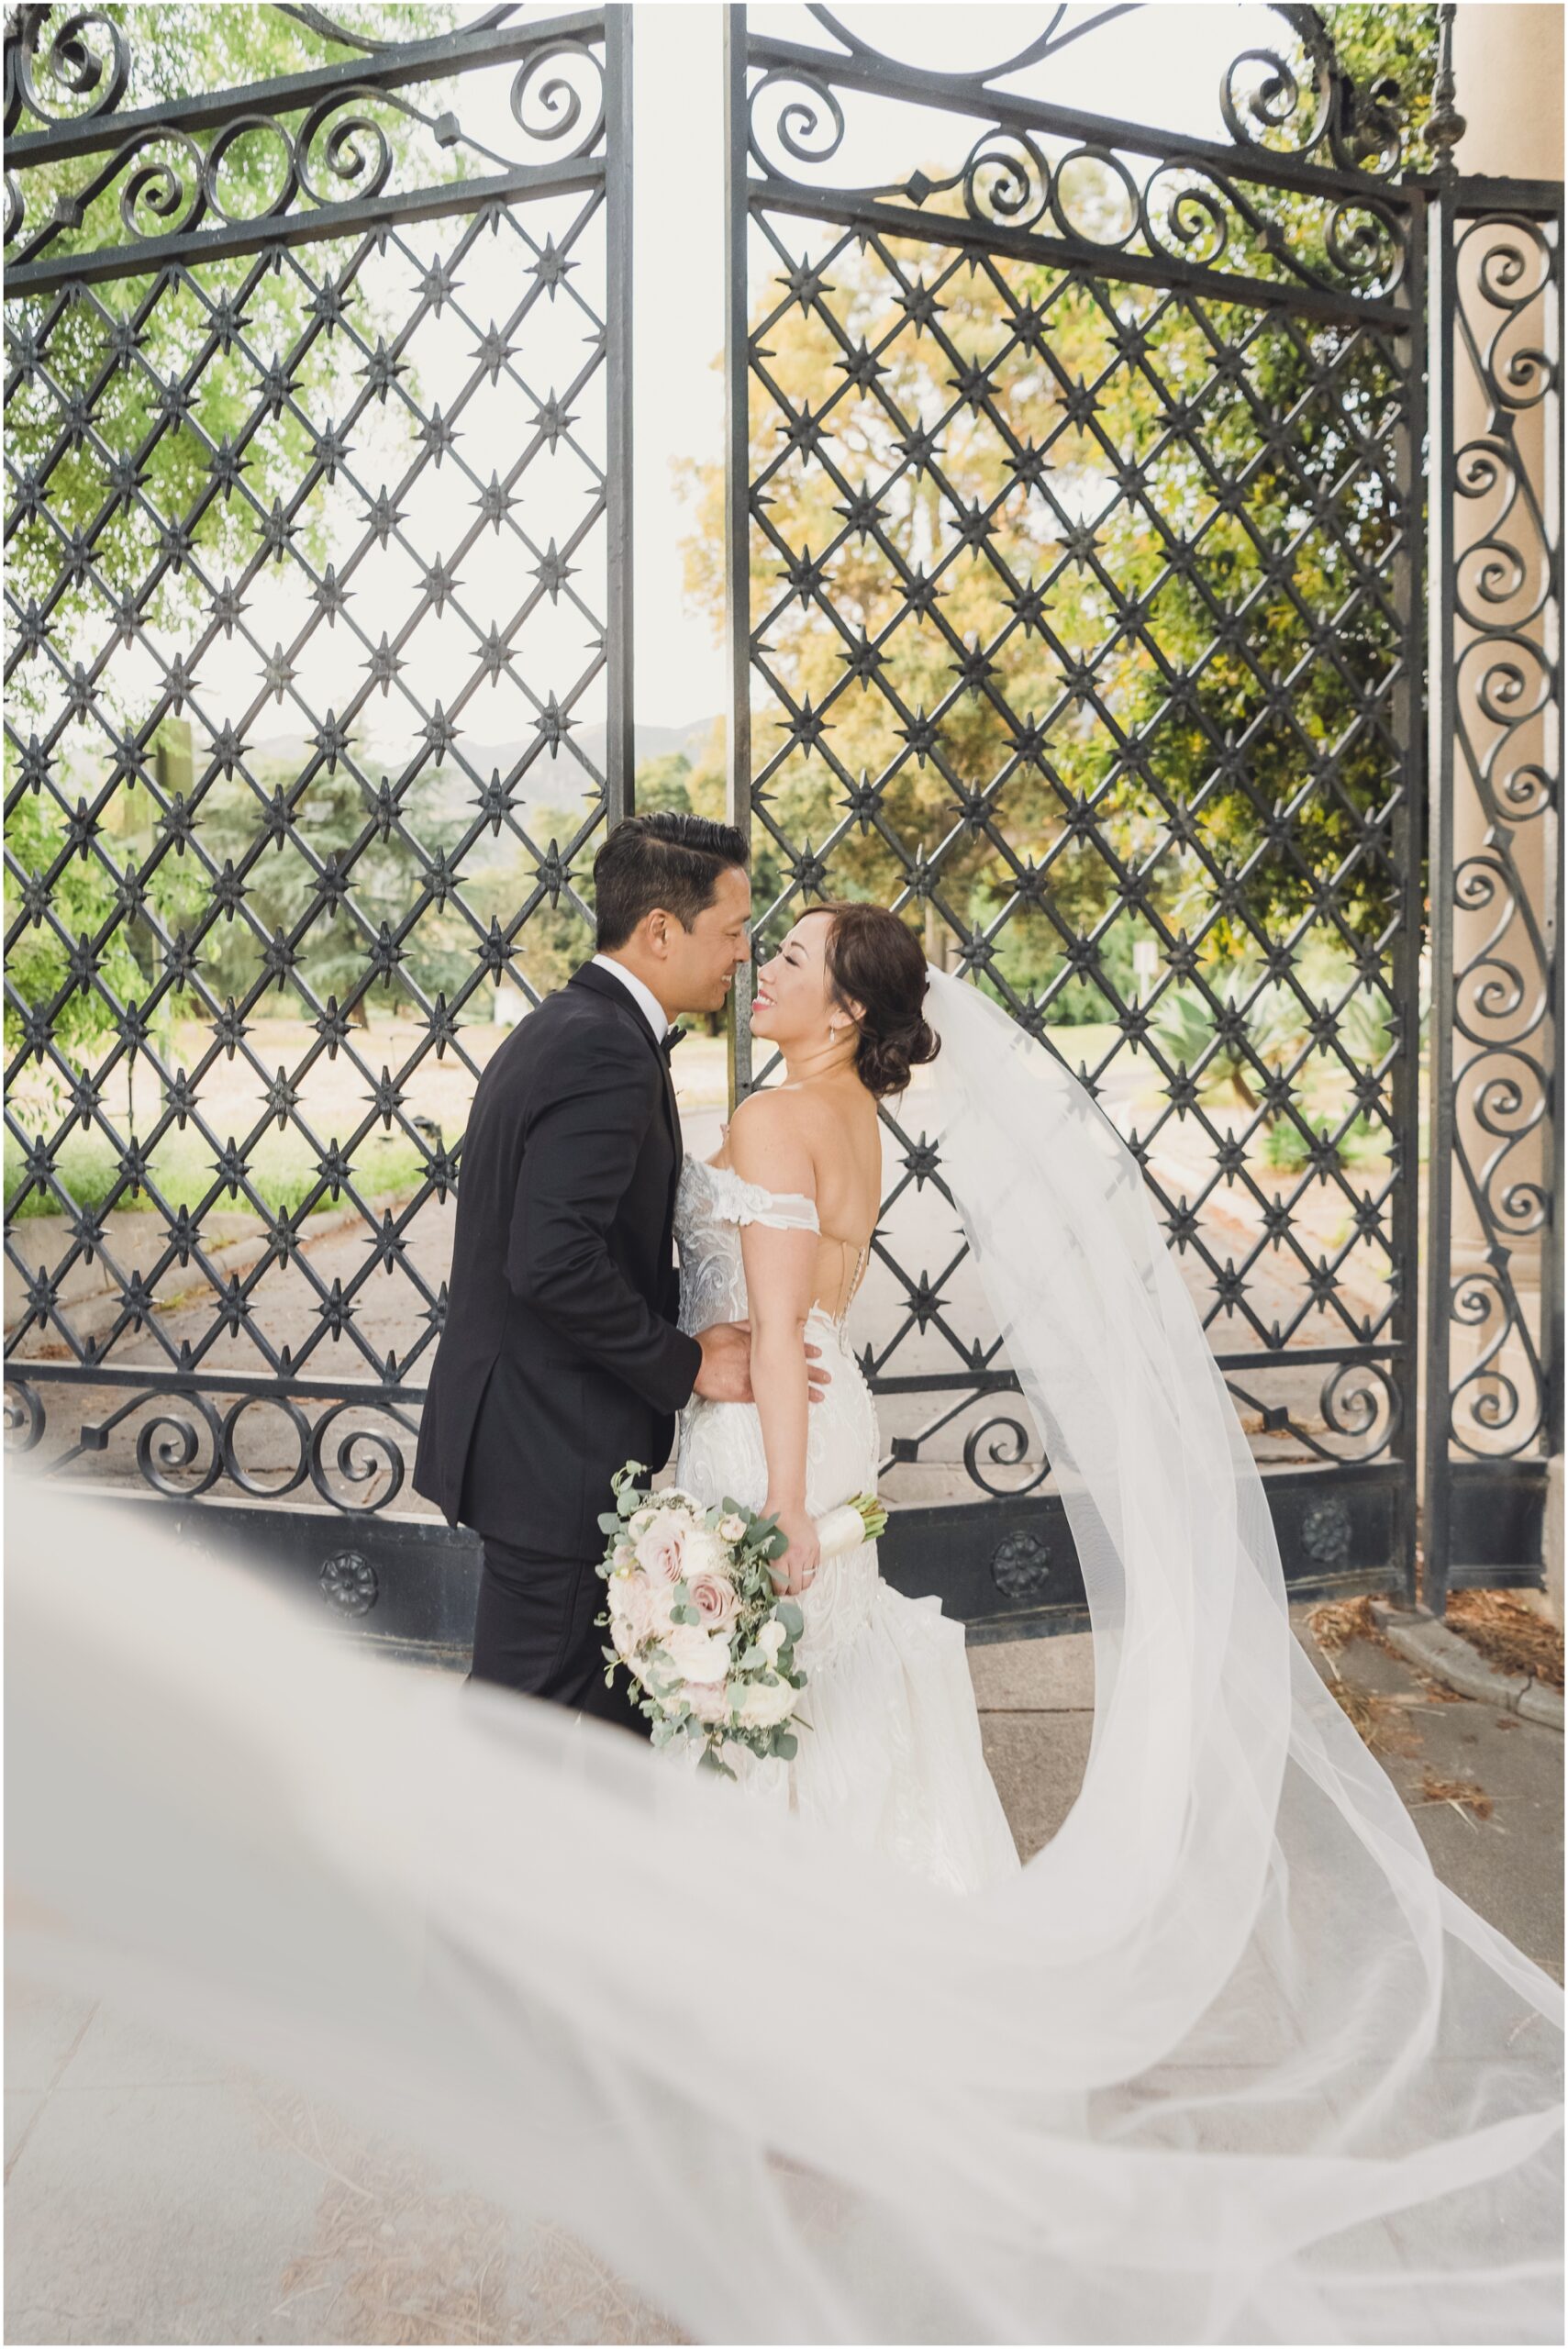 A bride and groom pose in front of an opening gate at Villa del sol d'Oro. the bride is holding a pink and white bouquet as her veil crosses the bottom of the photograph.